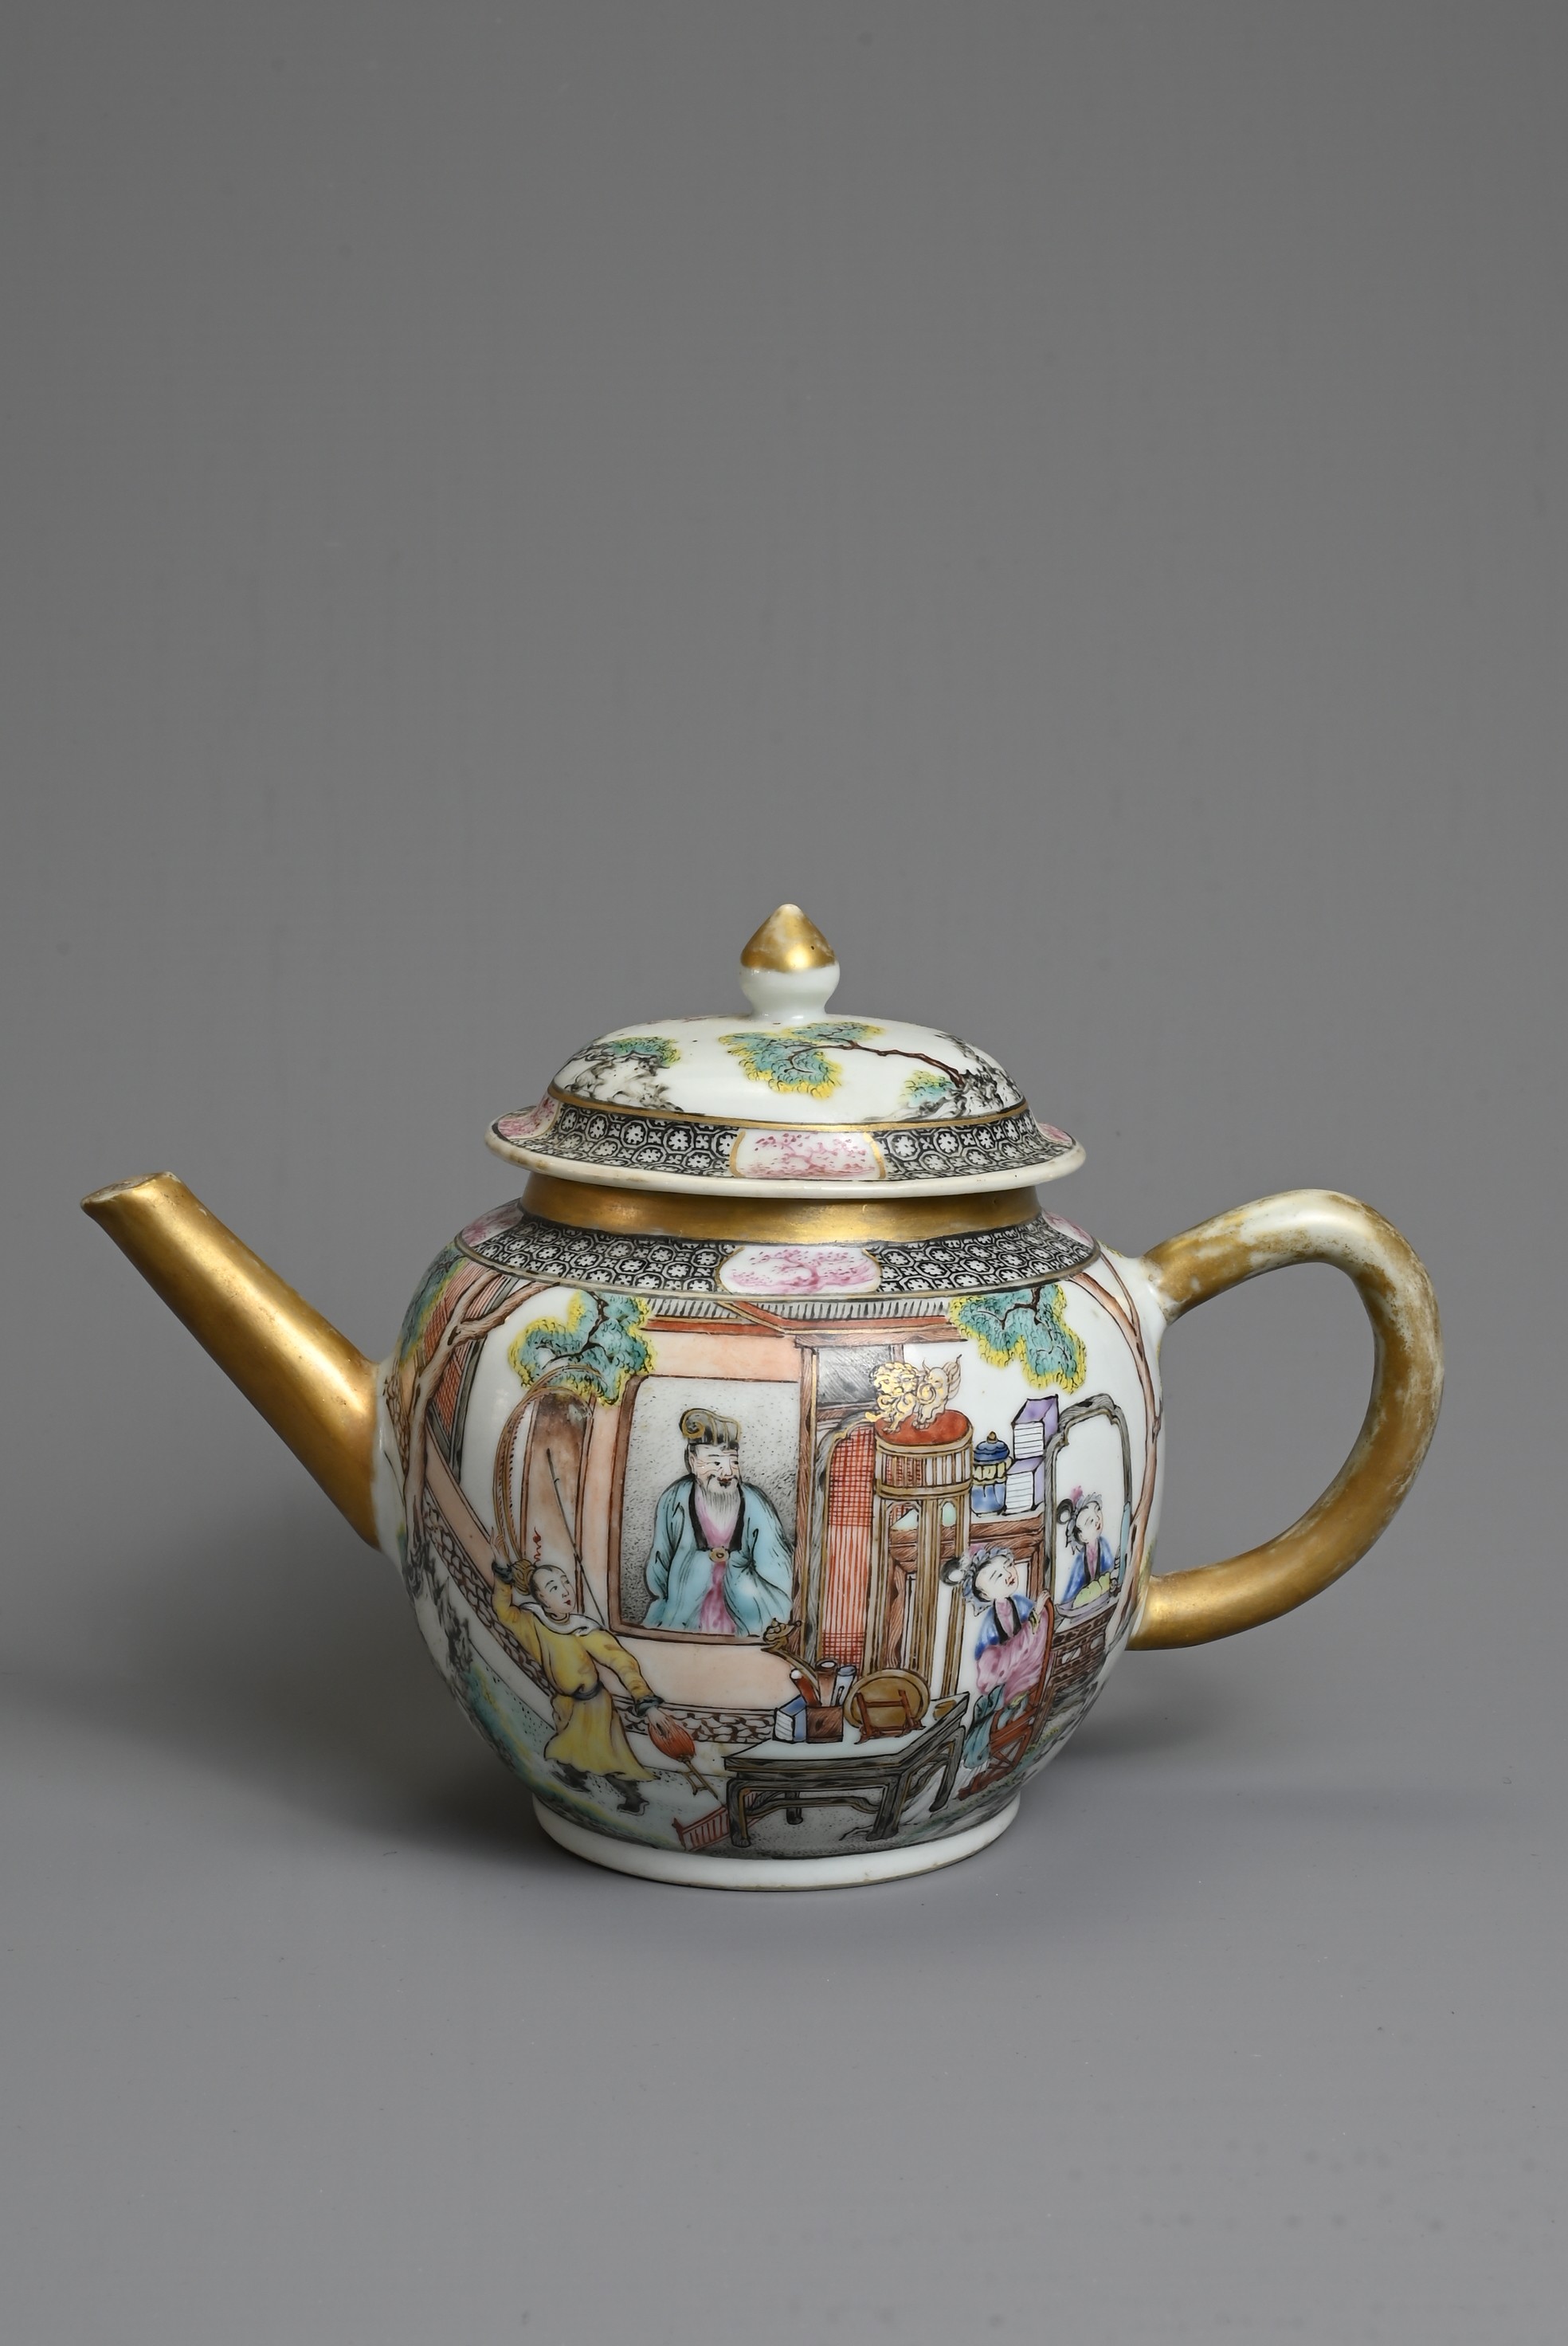 A FINE CHINESE FAMILLE ROSE PORCELAIN TEAPOT, 18TH CENTURY